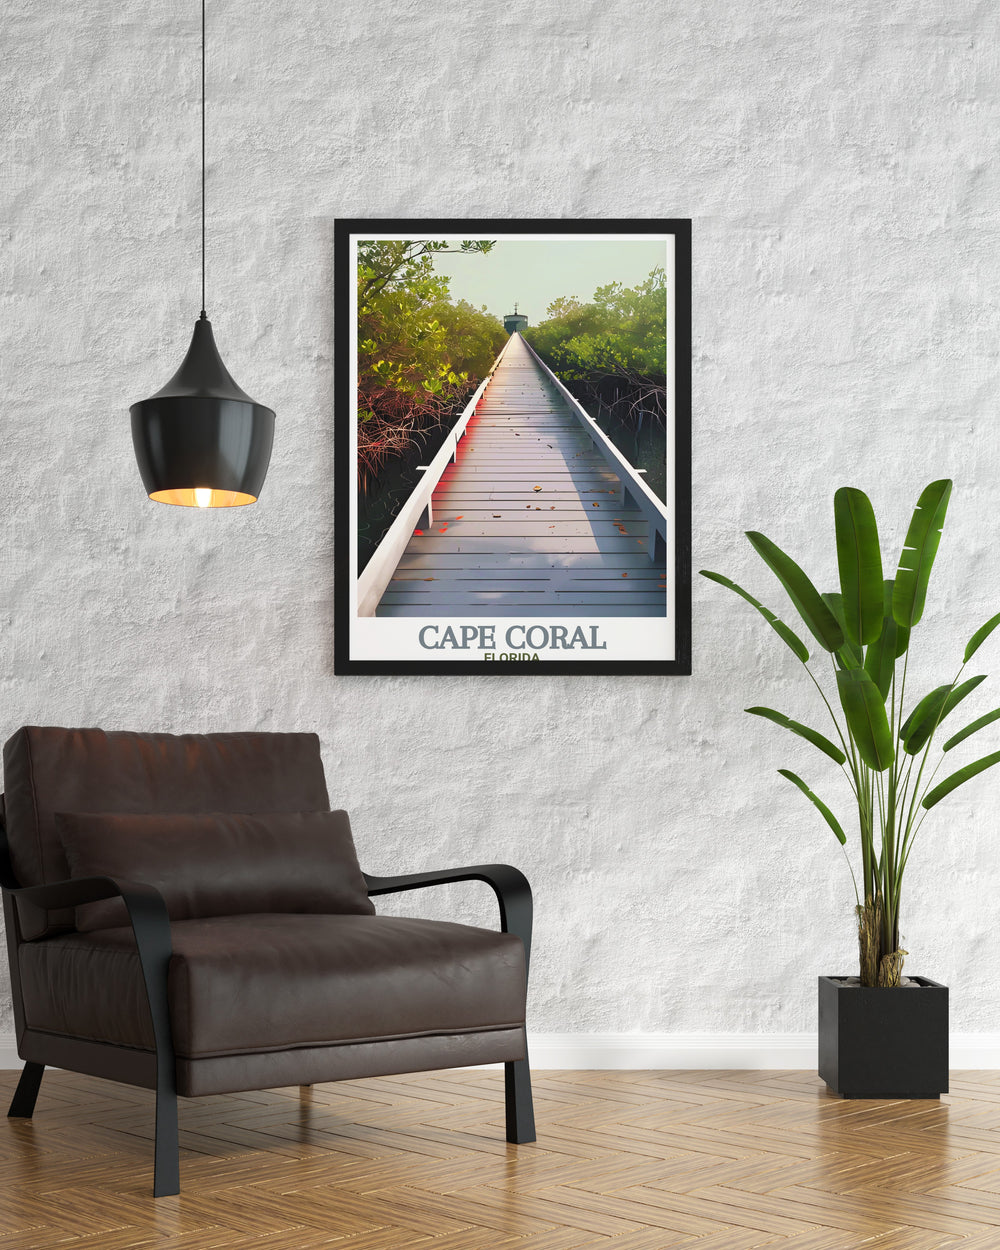 Stunning Cape Coral Wall Art depicting Glover Bight Trail brings a touch of Floridas scenic beauty to your home decor detailed artwork perfect for travel lovers and those who cherish serene natural landscapes.